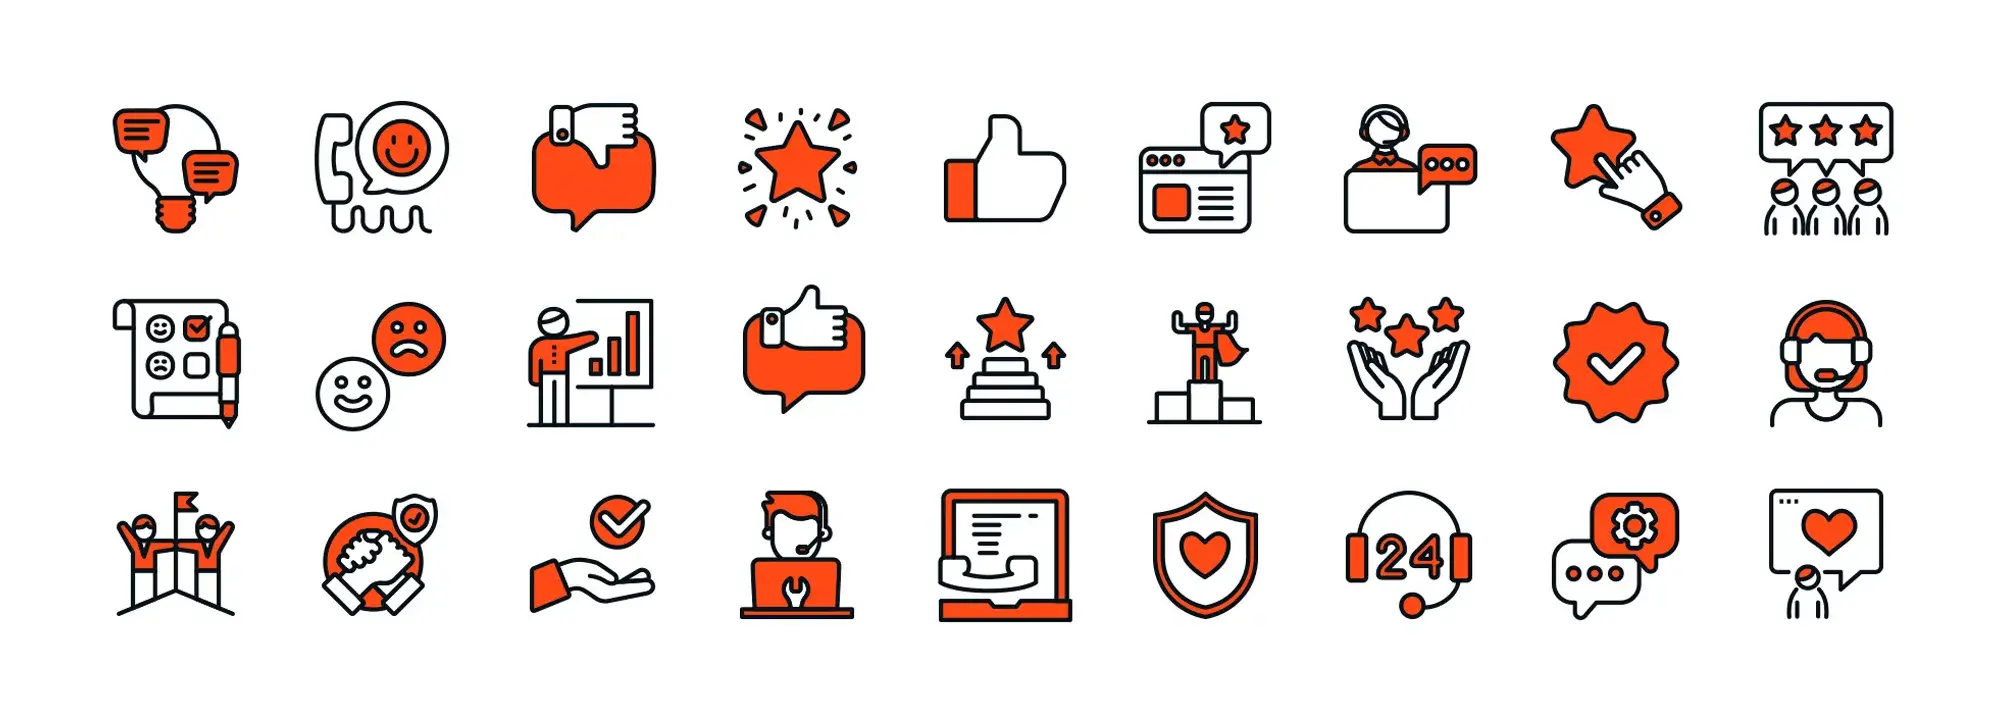 Support WordPress icons free